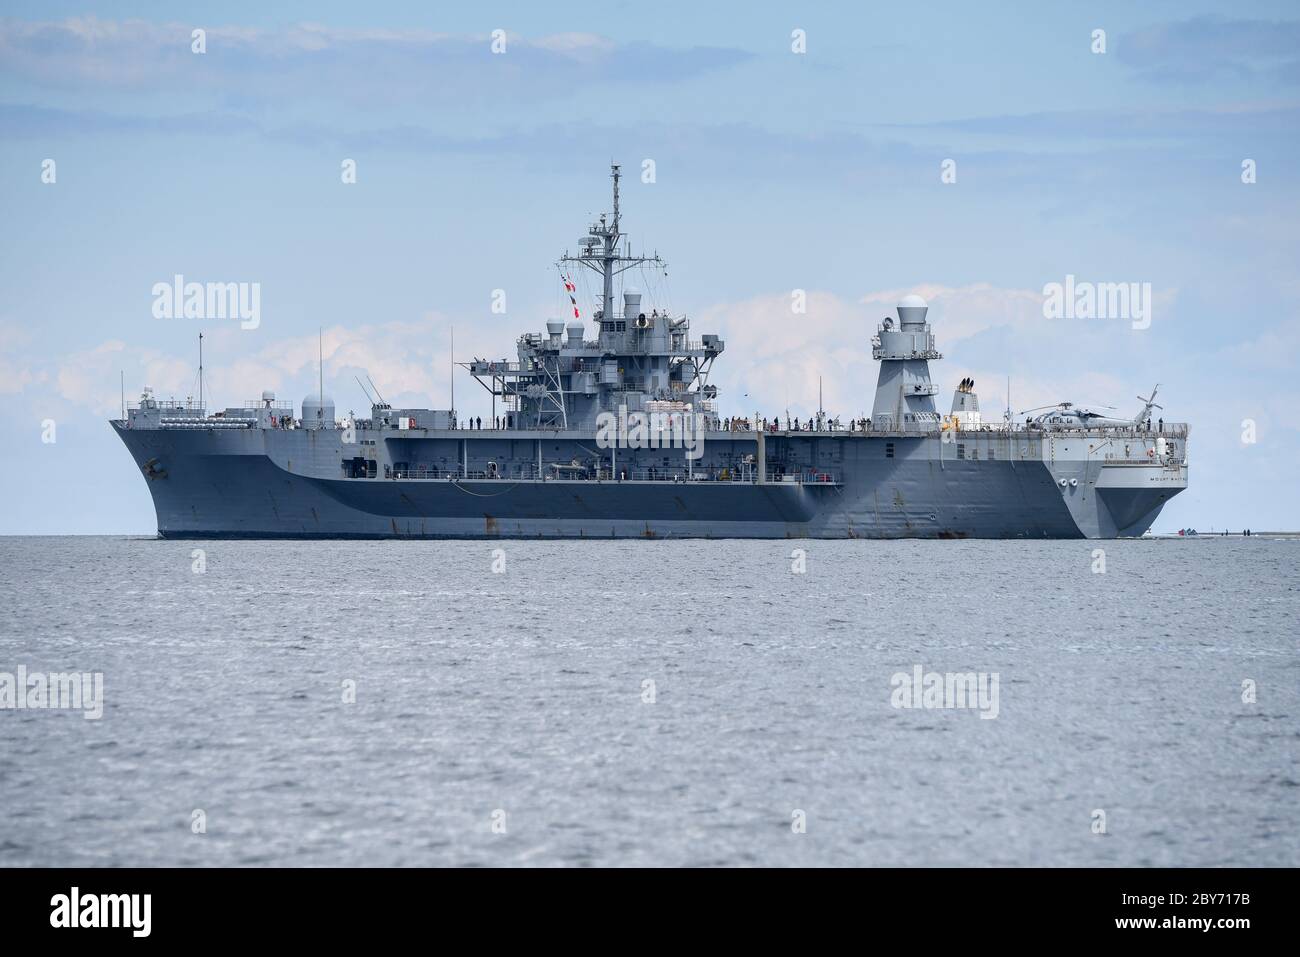 June 5, 2020, the USS Mount Whitney (LCC-20), a command ship for the United States Navy's amphibious warfare and the second Blue Ridge-class ship. It is named after Mount Whitney and has served in the U.S. Navy since 1971, and has been part of the Military Sealift Command since 2004. It is based in Gaeta, Italy and serves as the flagship for the commander of the 6th U.S. fleet. The ship leaving Kiel during the NATO maneuver BALTOPS. | usage worldwide Stock Photo